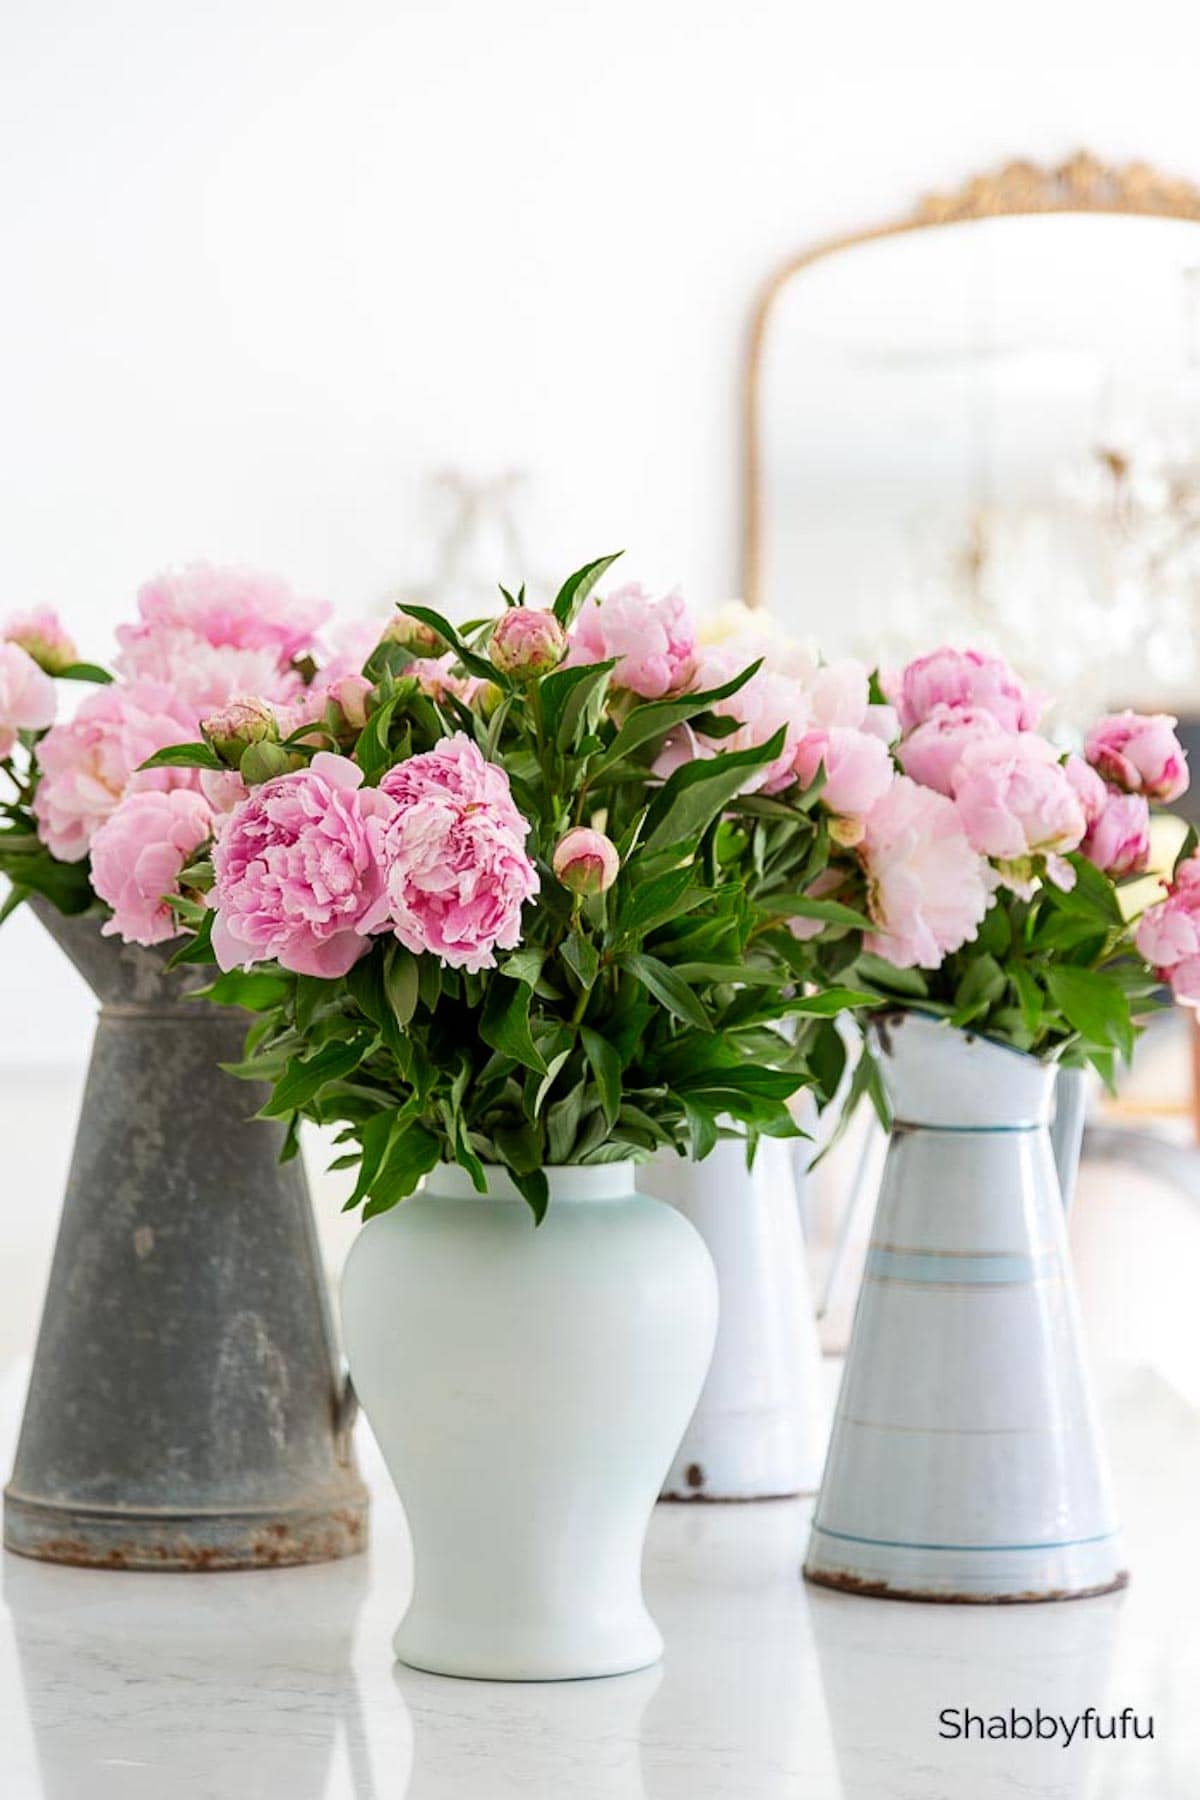 The Art Of Peonies, A French Artist’s Home & More! French Country Fridays 374